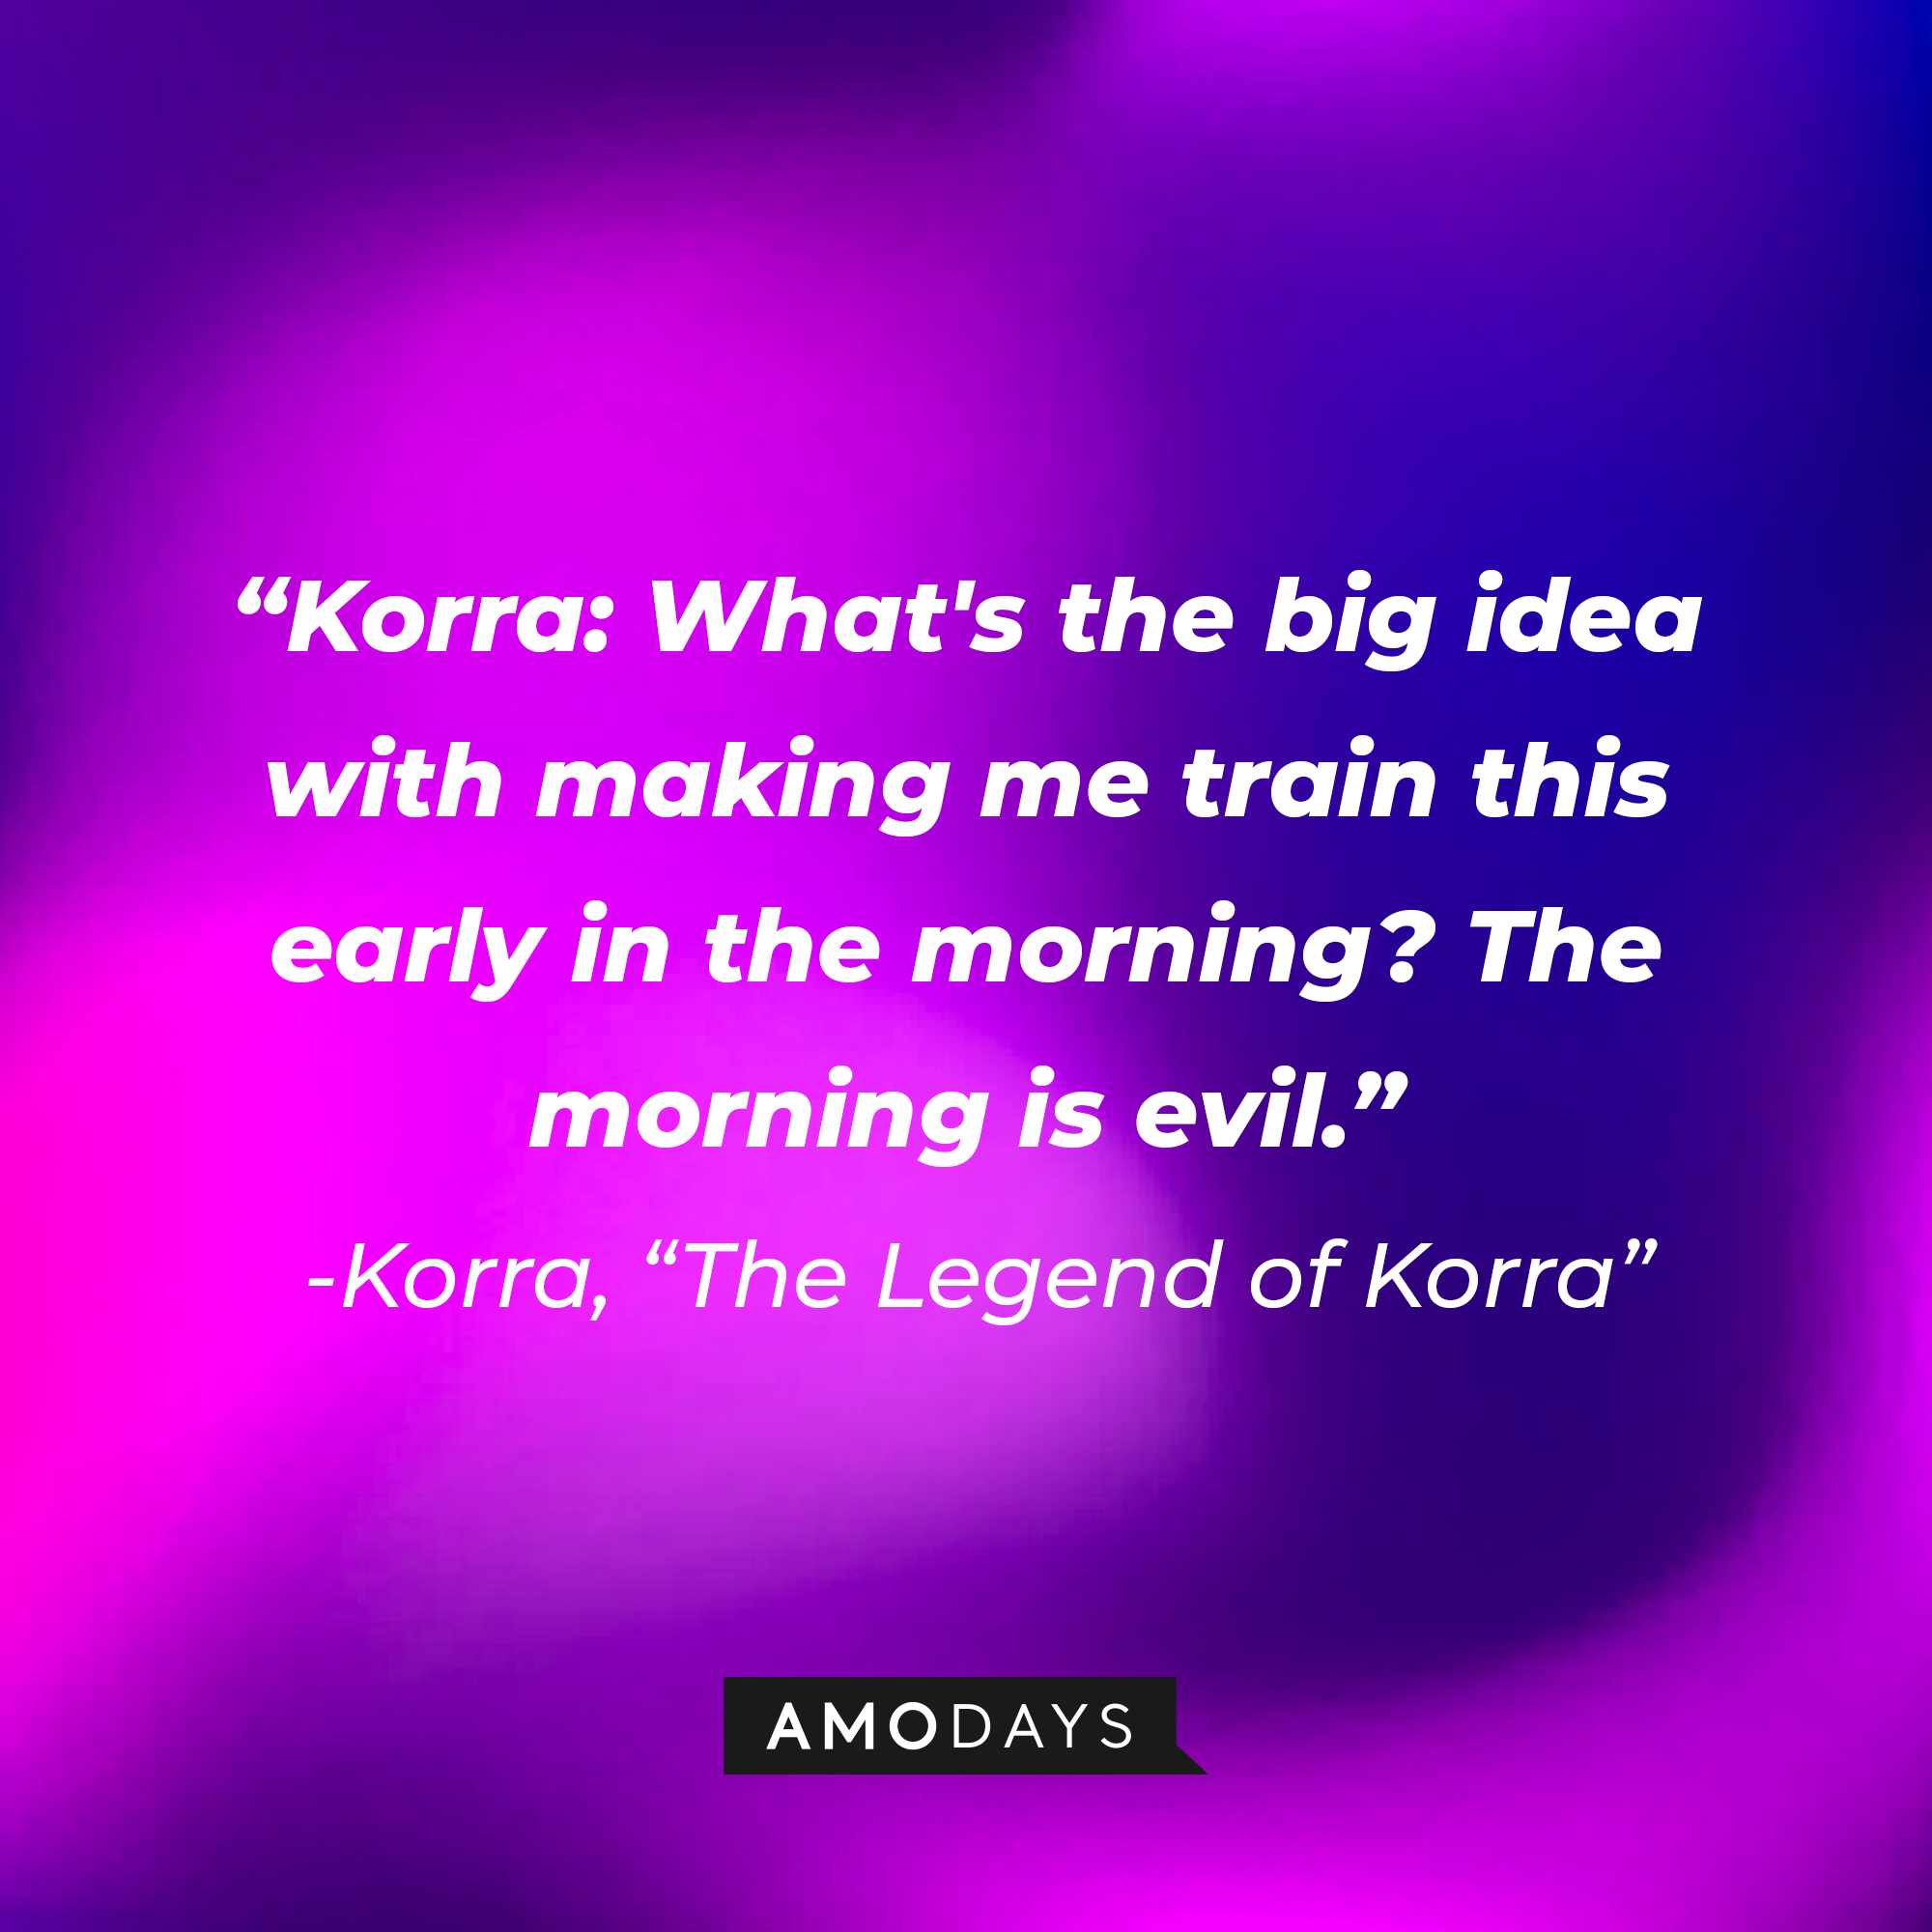 Korra’s quote in “Avatar: The Legend of Korra:” “What's the big idea with making me train this early in the morning? The morning is evil." | Source: Amodays